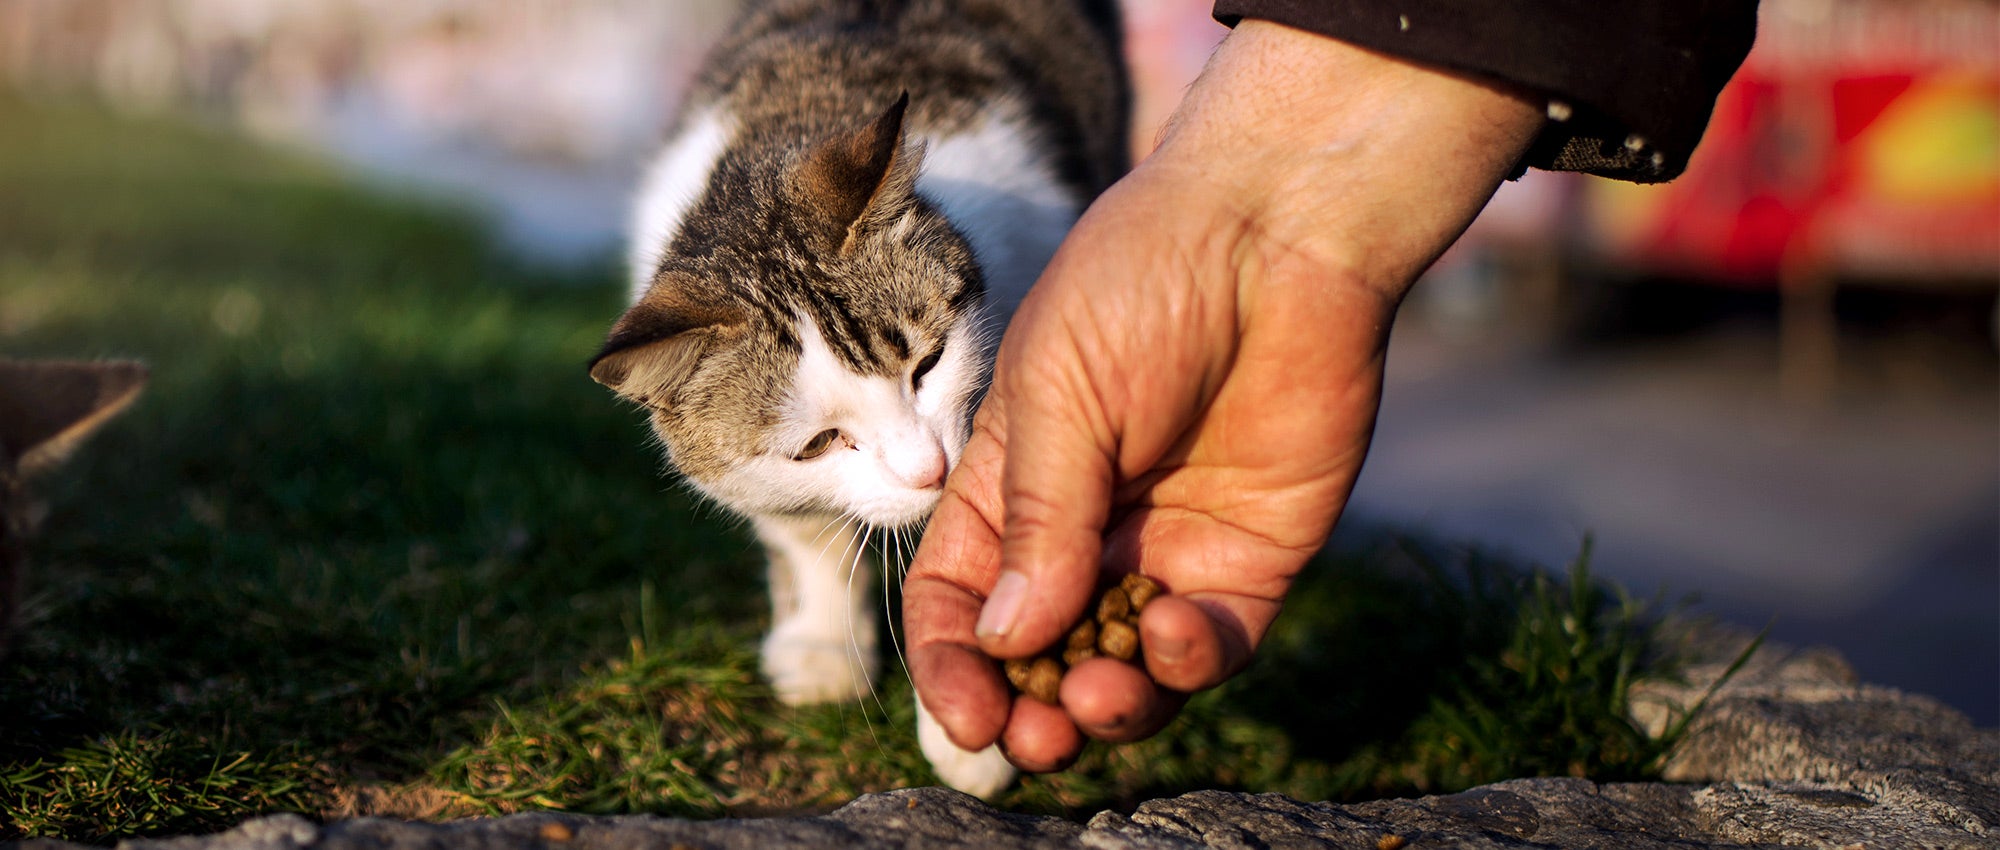 How to help a stray pet | The Humane Society of the United States